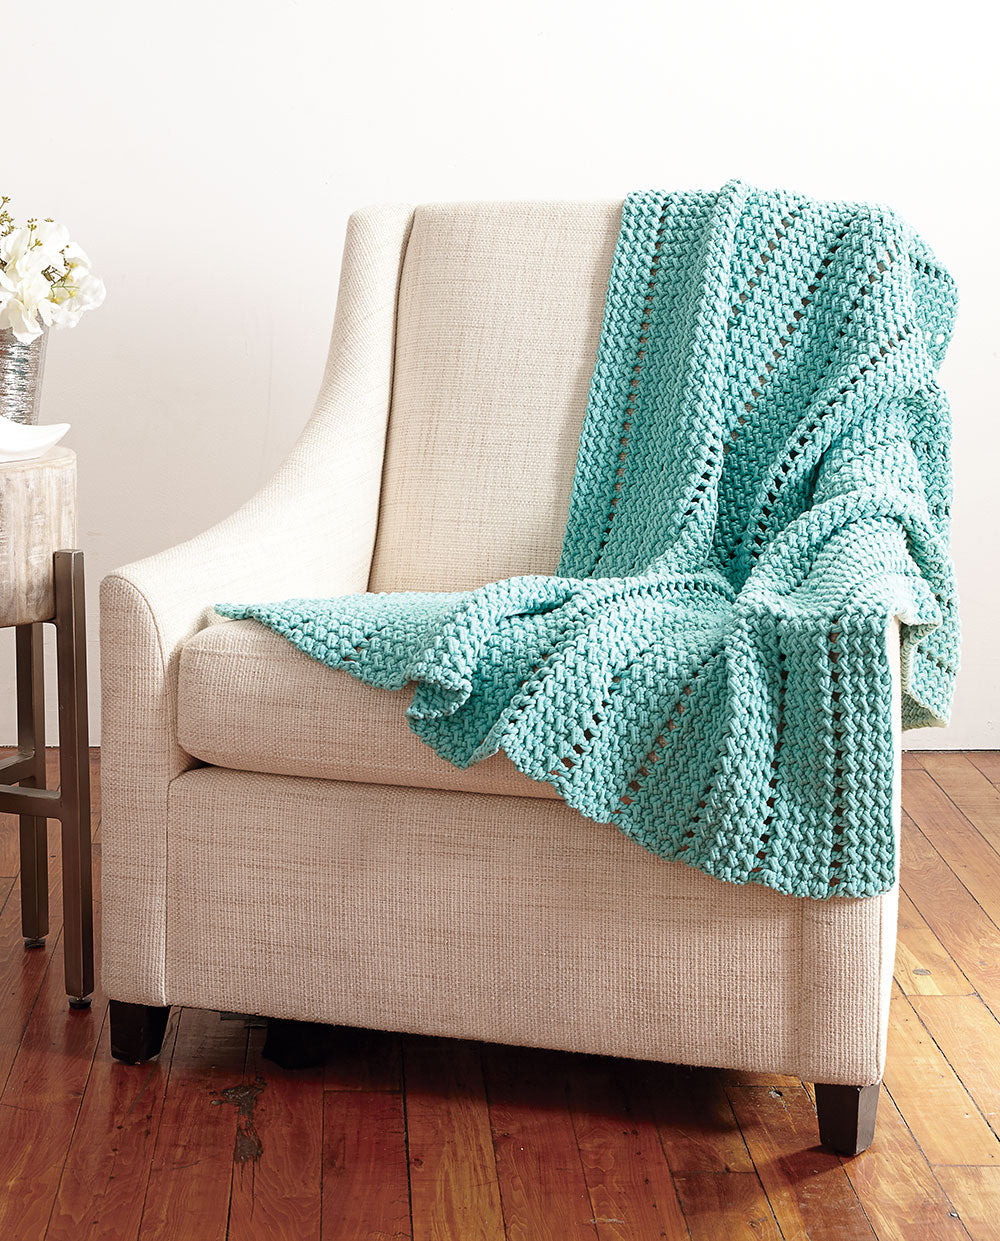 Free Eyelets and Textures Blanket Pattern